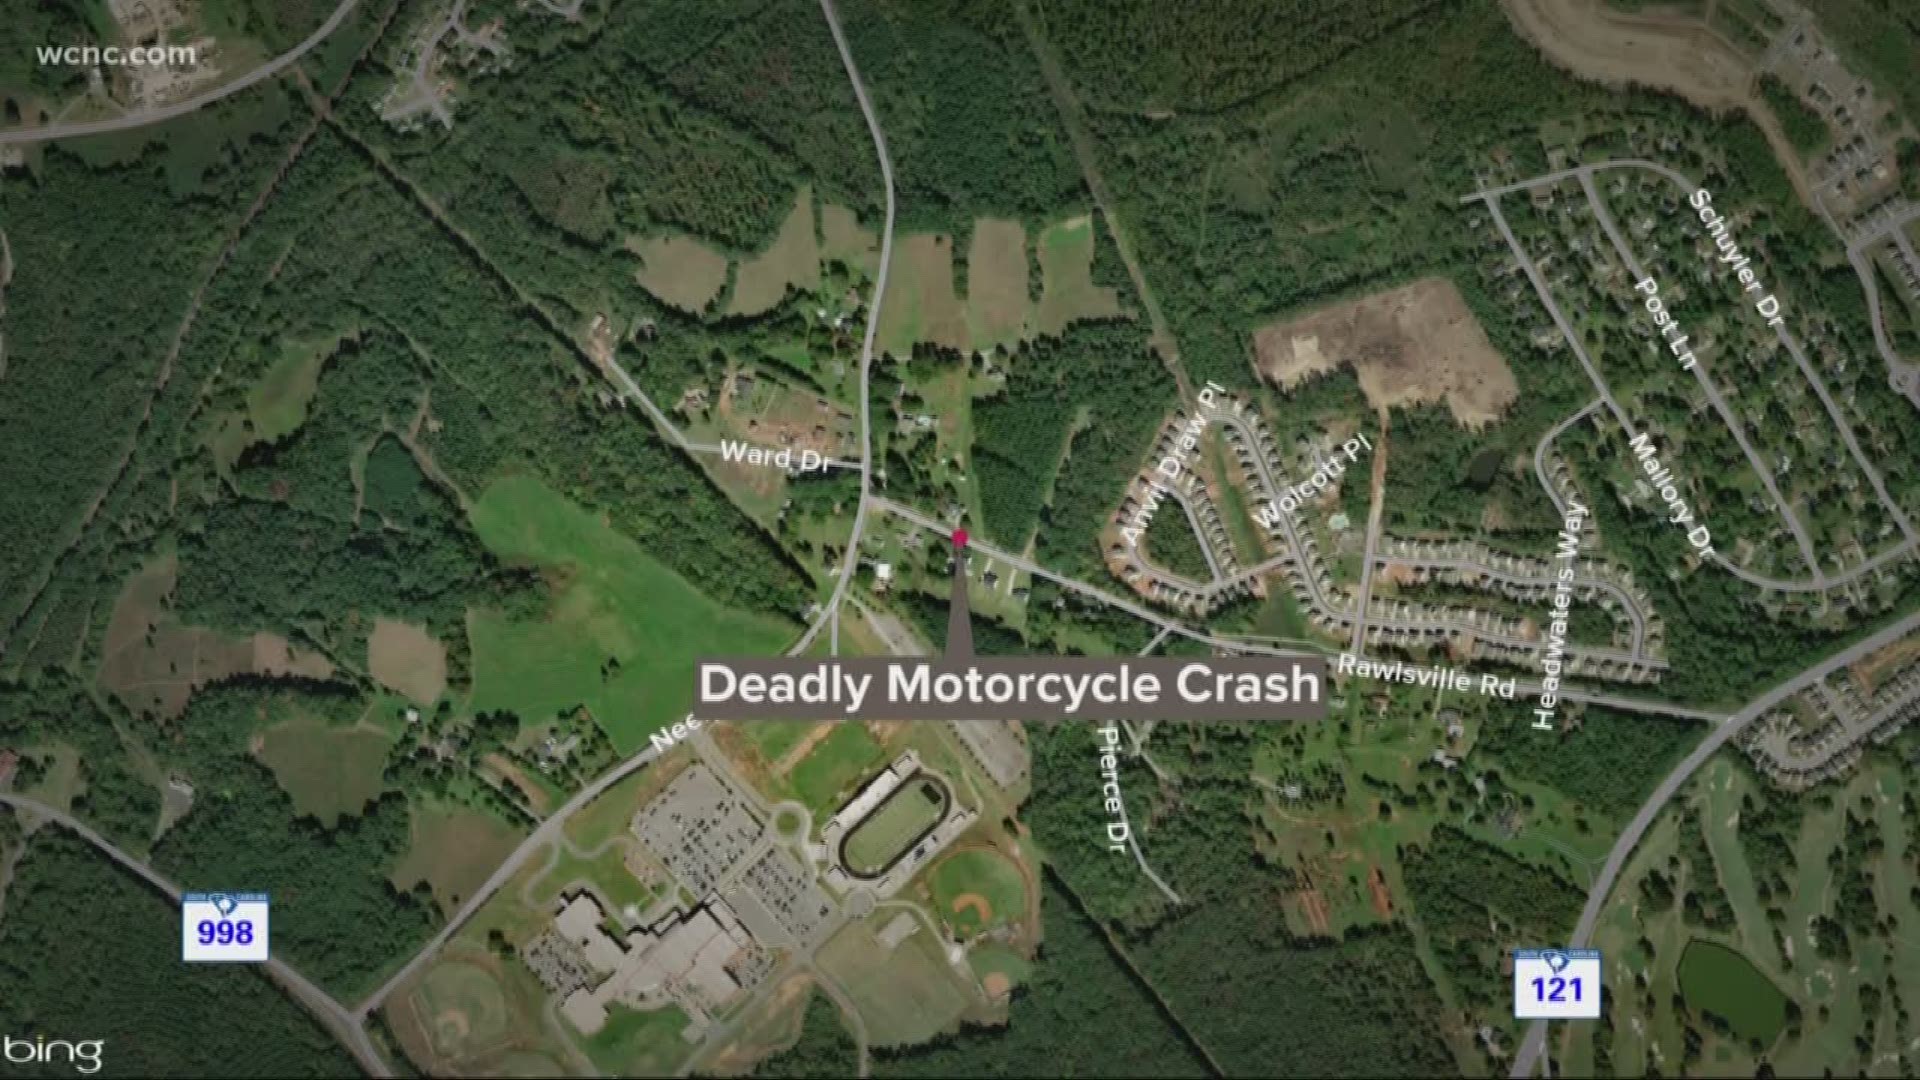 Police say a motorcycle driver left the road and crashed. He was later identified as James Medina, 40.